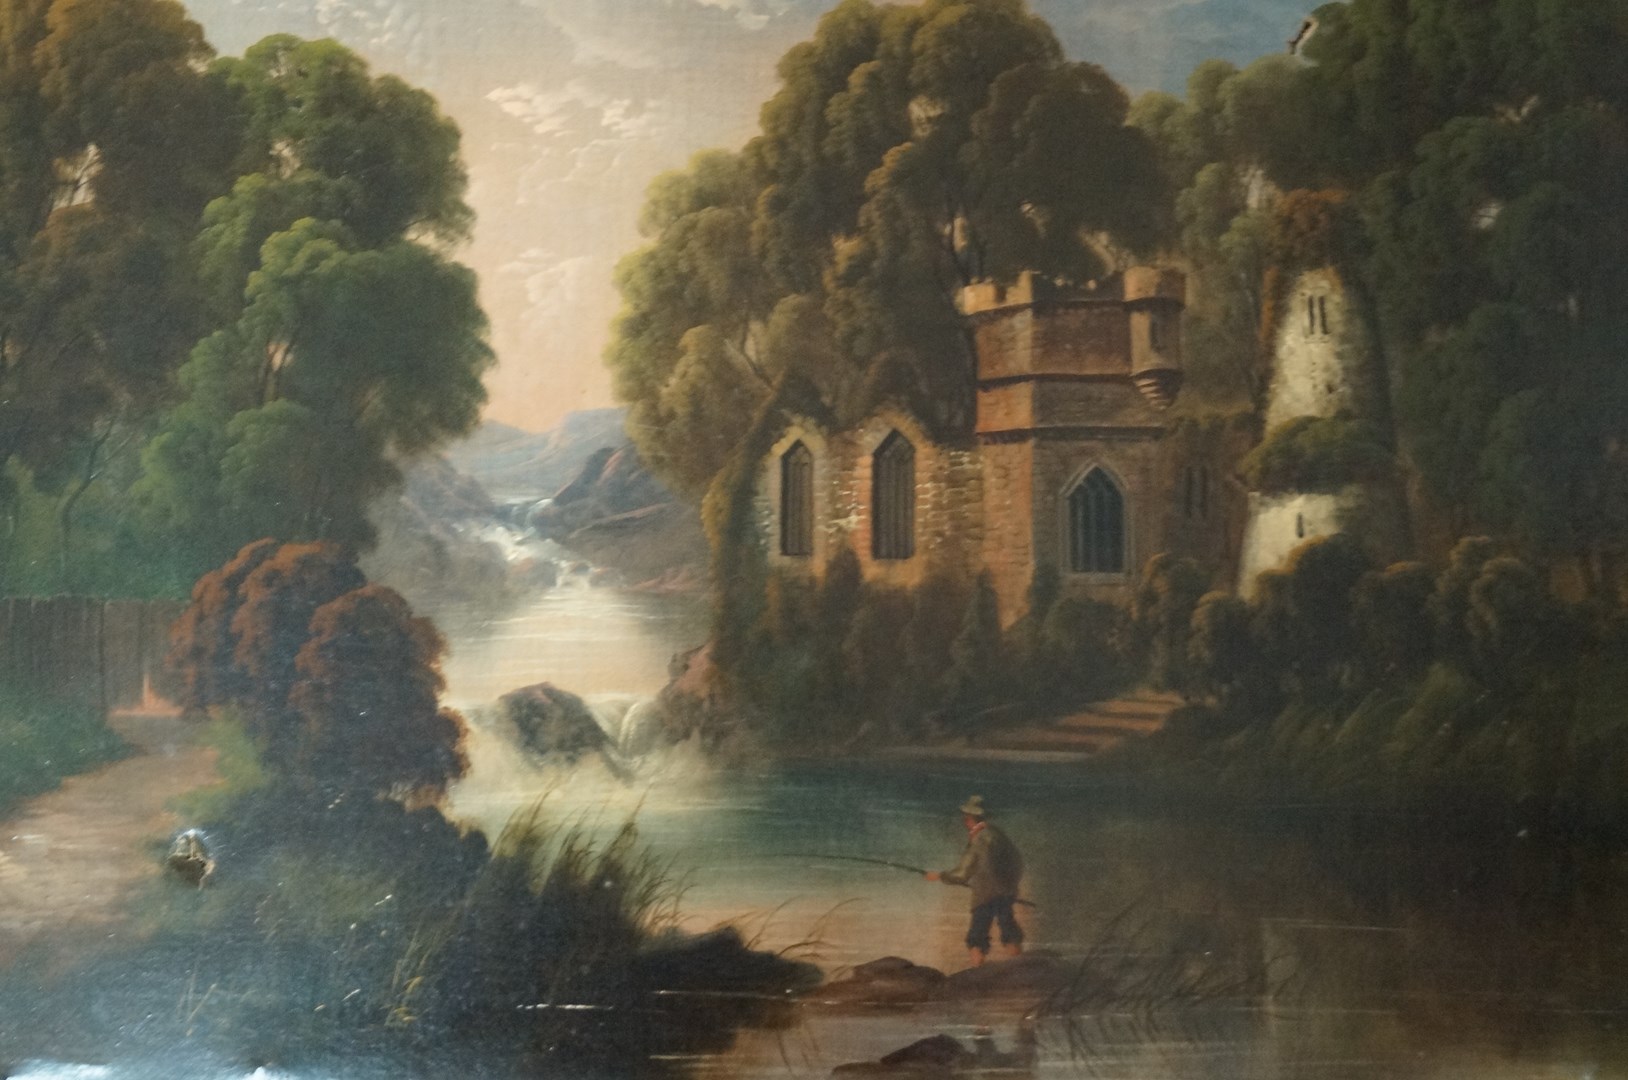 English School, 19th century
Figure fishing in a river landscape with ruins beyond
Oil on canvas
51.